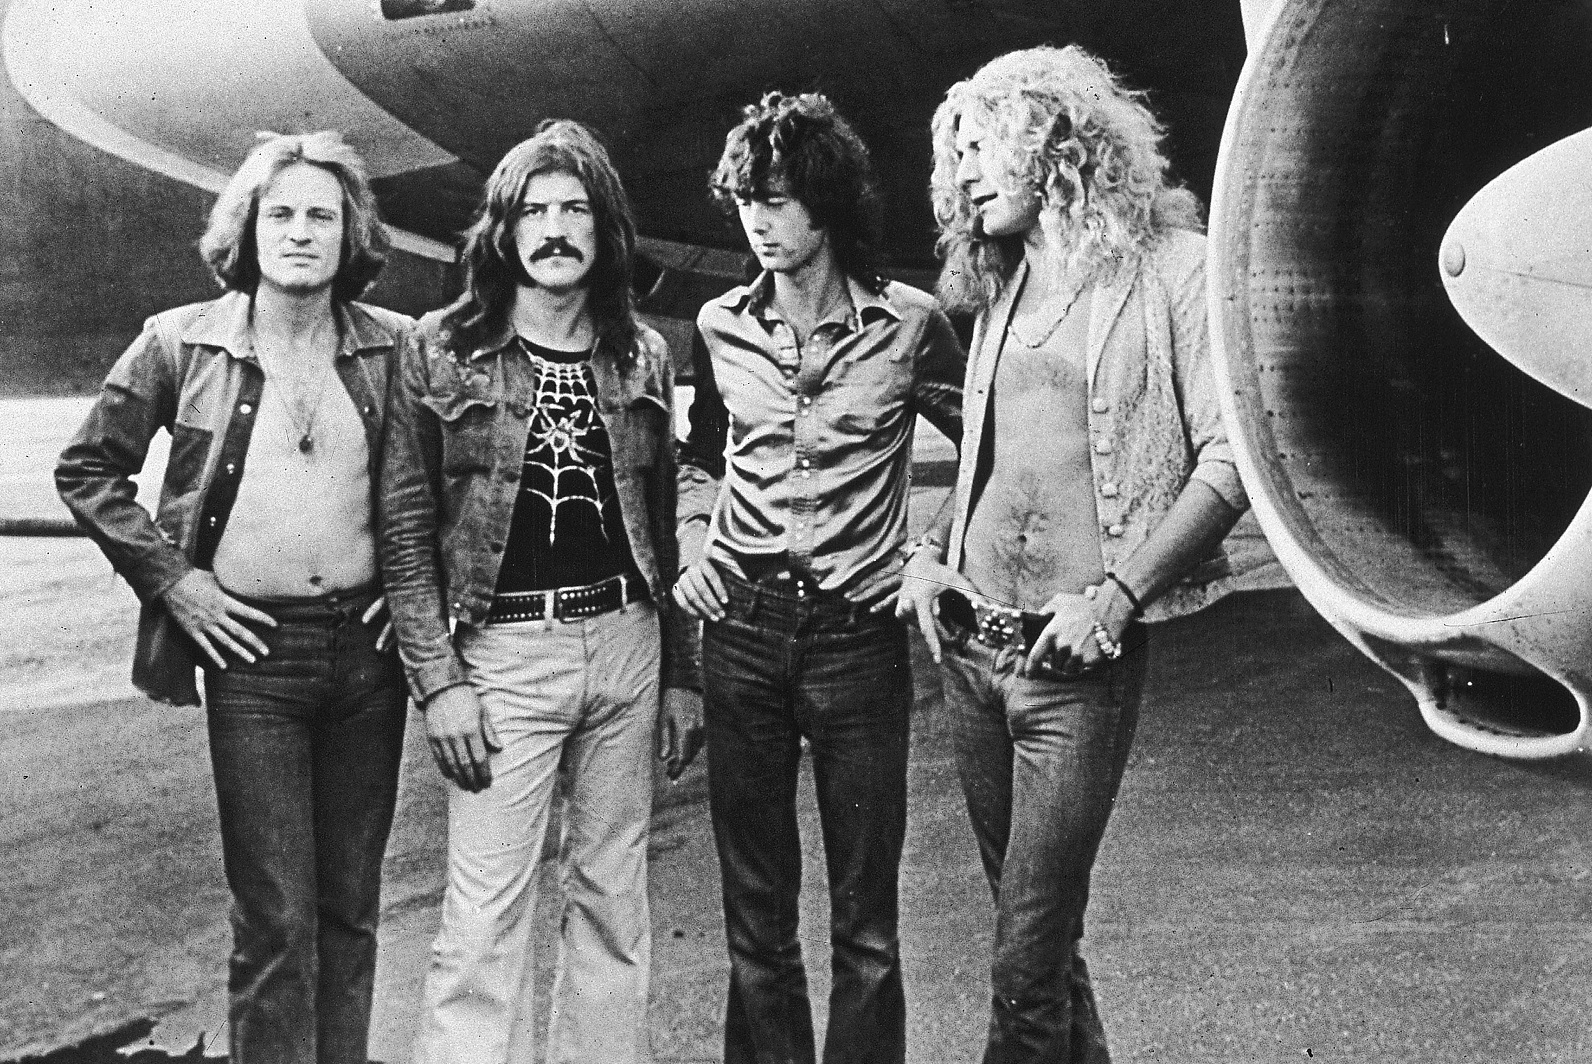 Led Zeppelin posed in front of Starship airplane